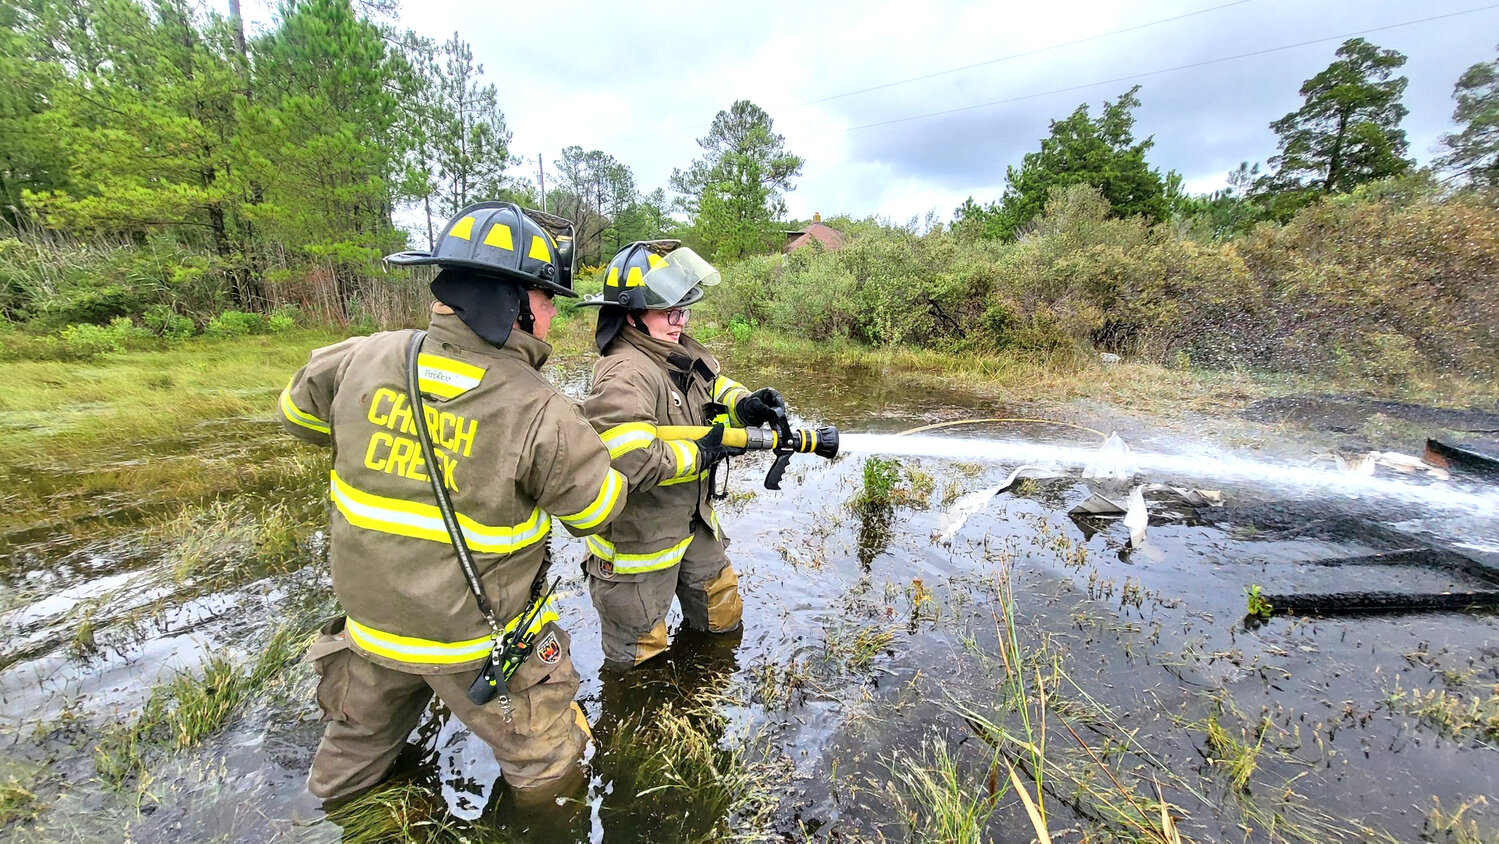 Members of Church Creek VFC directed a stream of water on the fire.